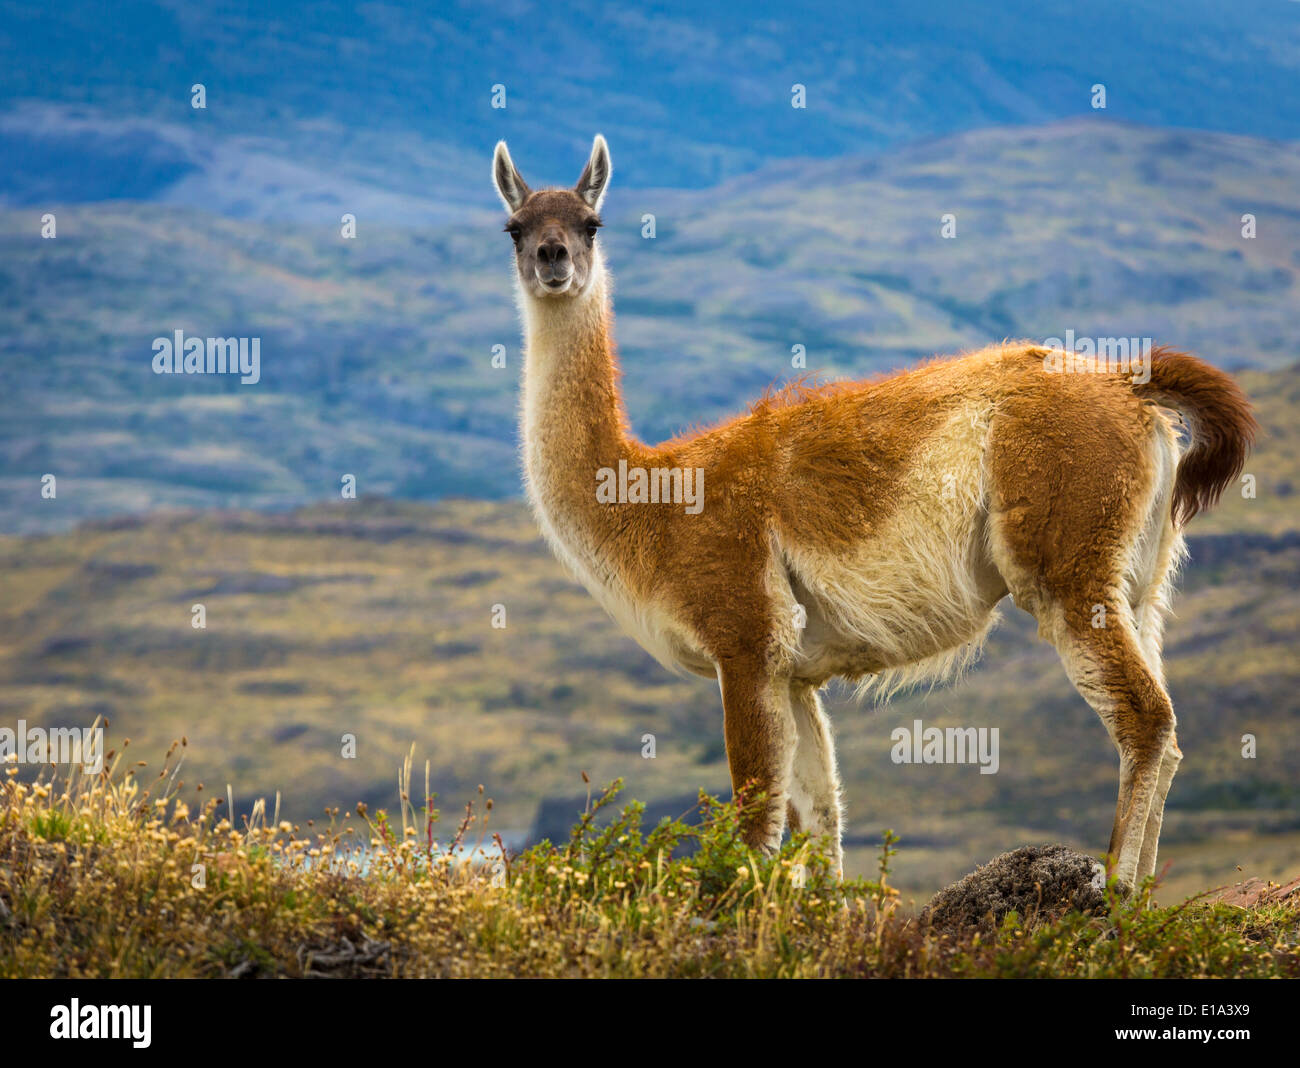 Guanaco in Chile's Torres del Paine national park Stock Photo